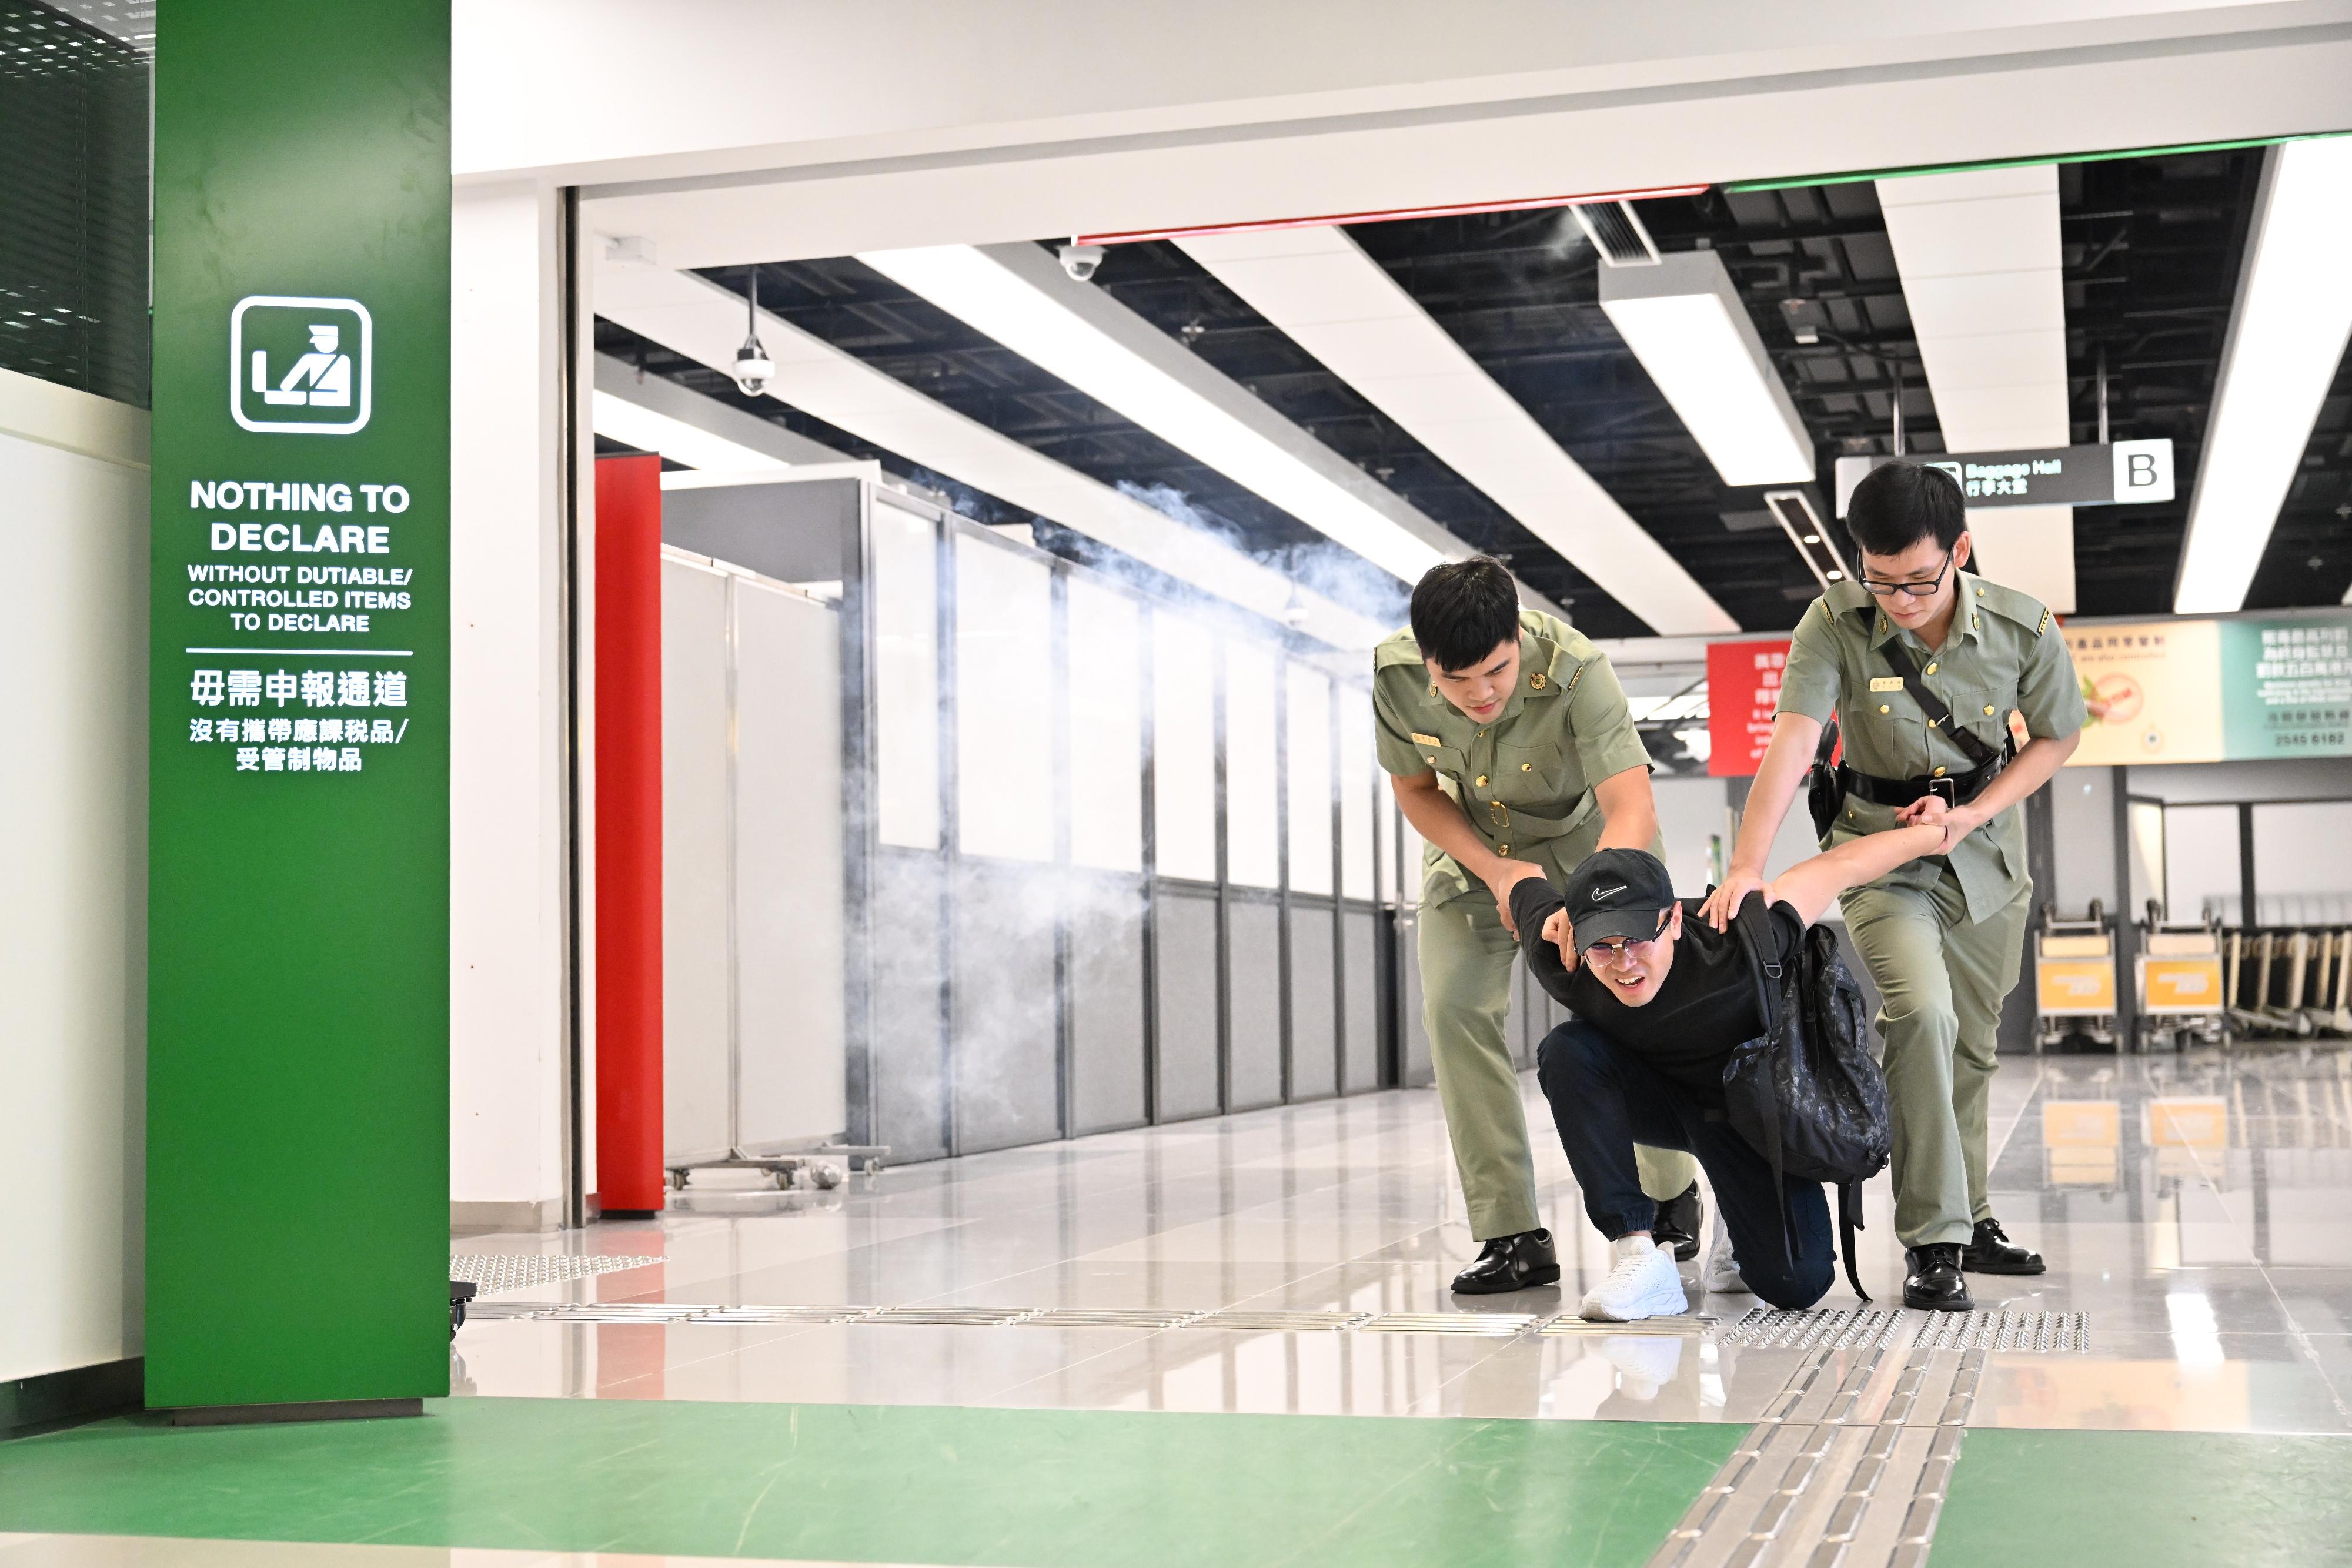 Hong Kong Customs and the Fire Services Department co-organised a counter-terrorism exercise codenamed "GATEKEEPER II" this afternoon (May 30) at the Ocean Terminal. Photo shows Customs officers subduing an attacker.